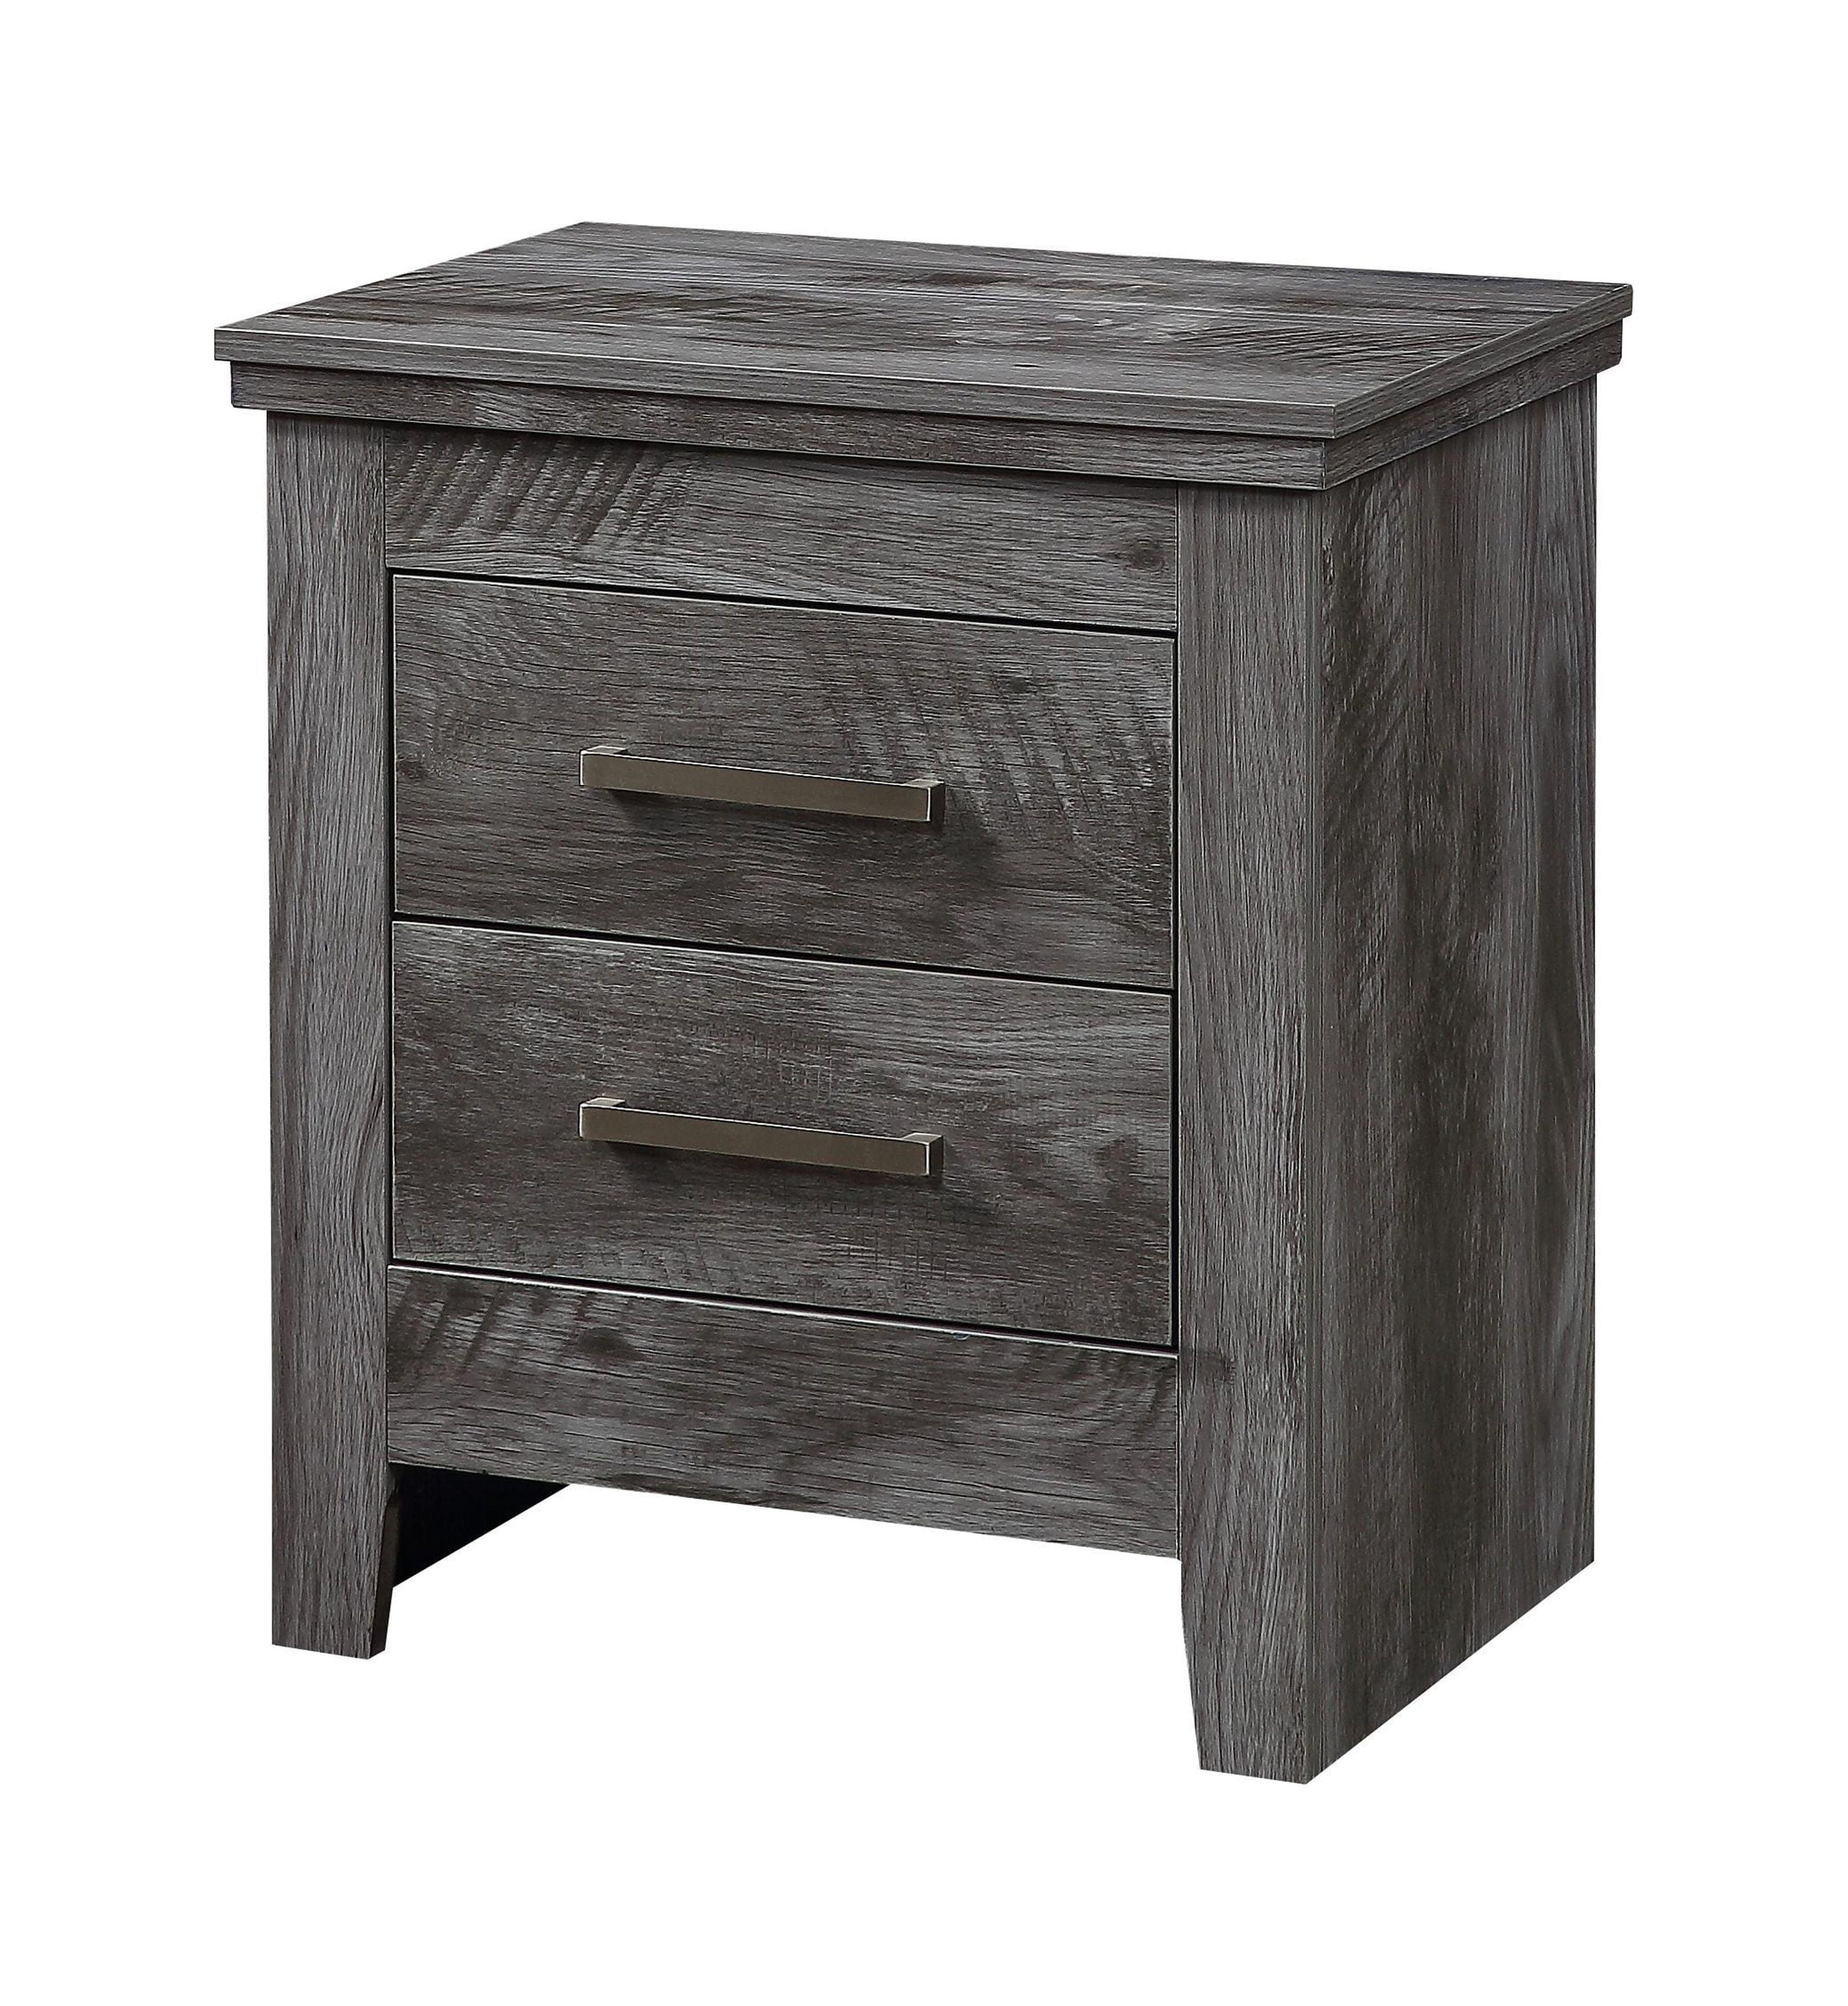 Rustic Gray Solid Wood 2-Drawer Nightstand with Metal Pulls